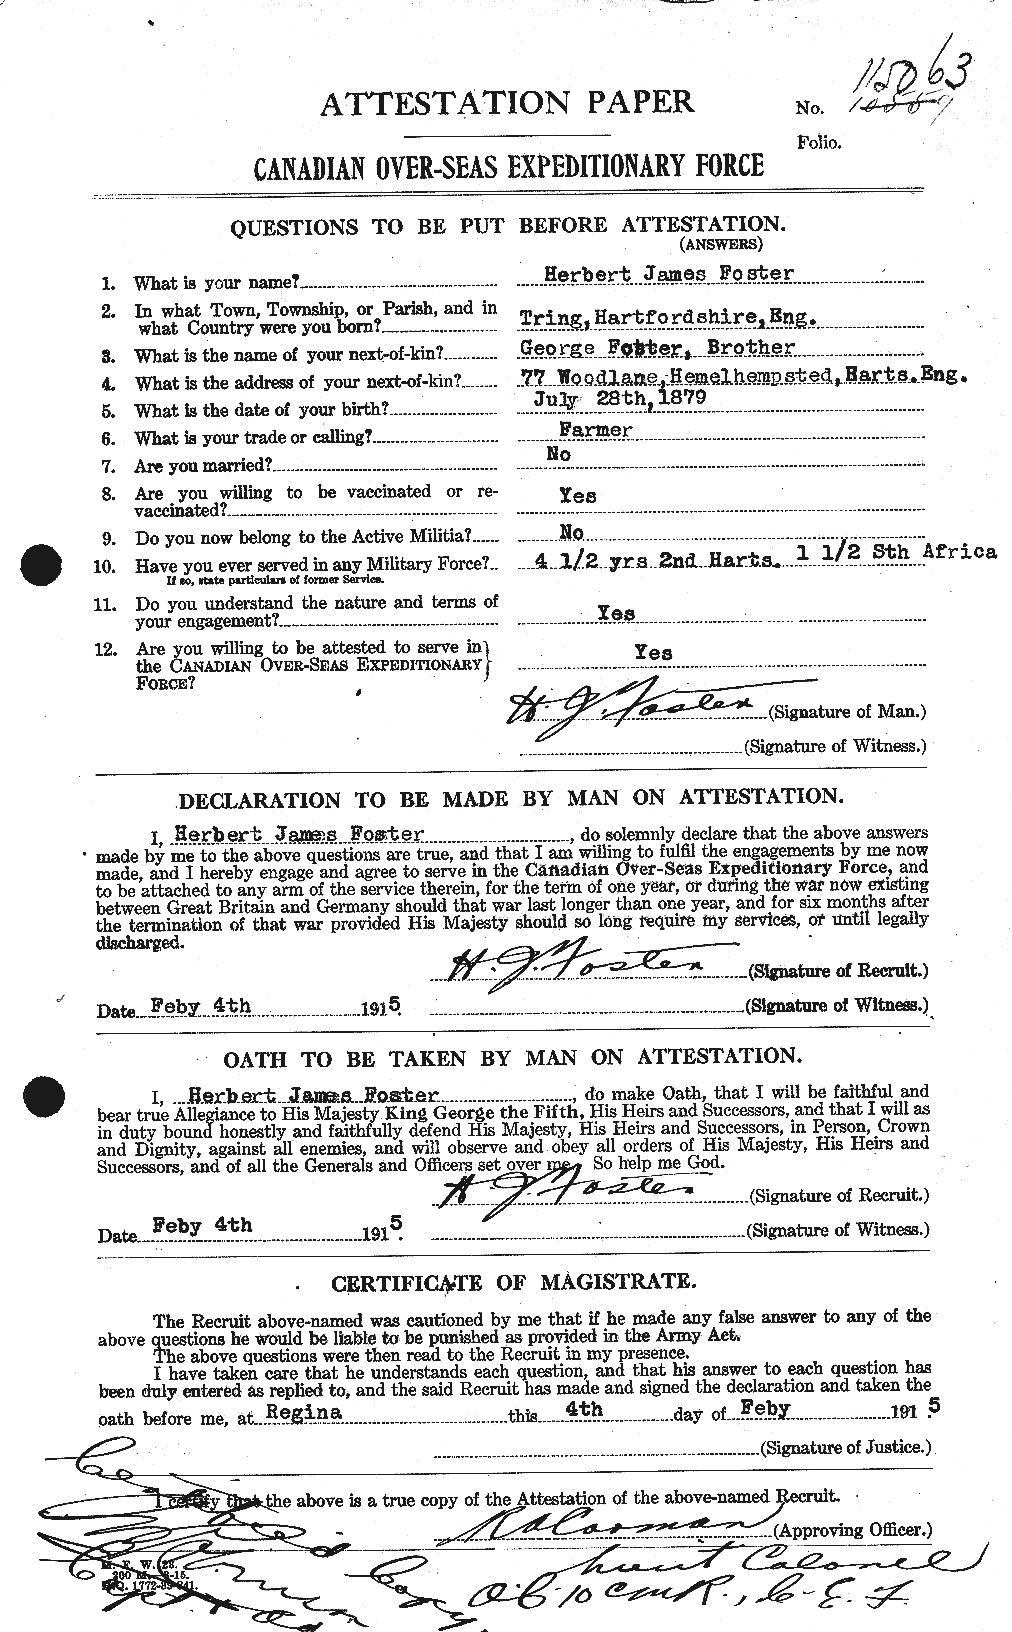 Personnel Records of the First World War - CEF 333258a